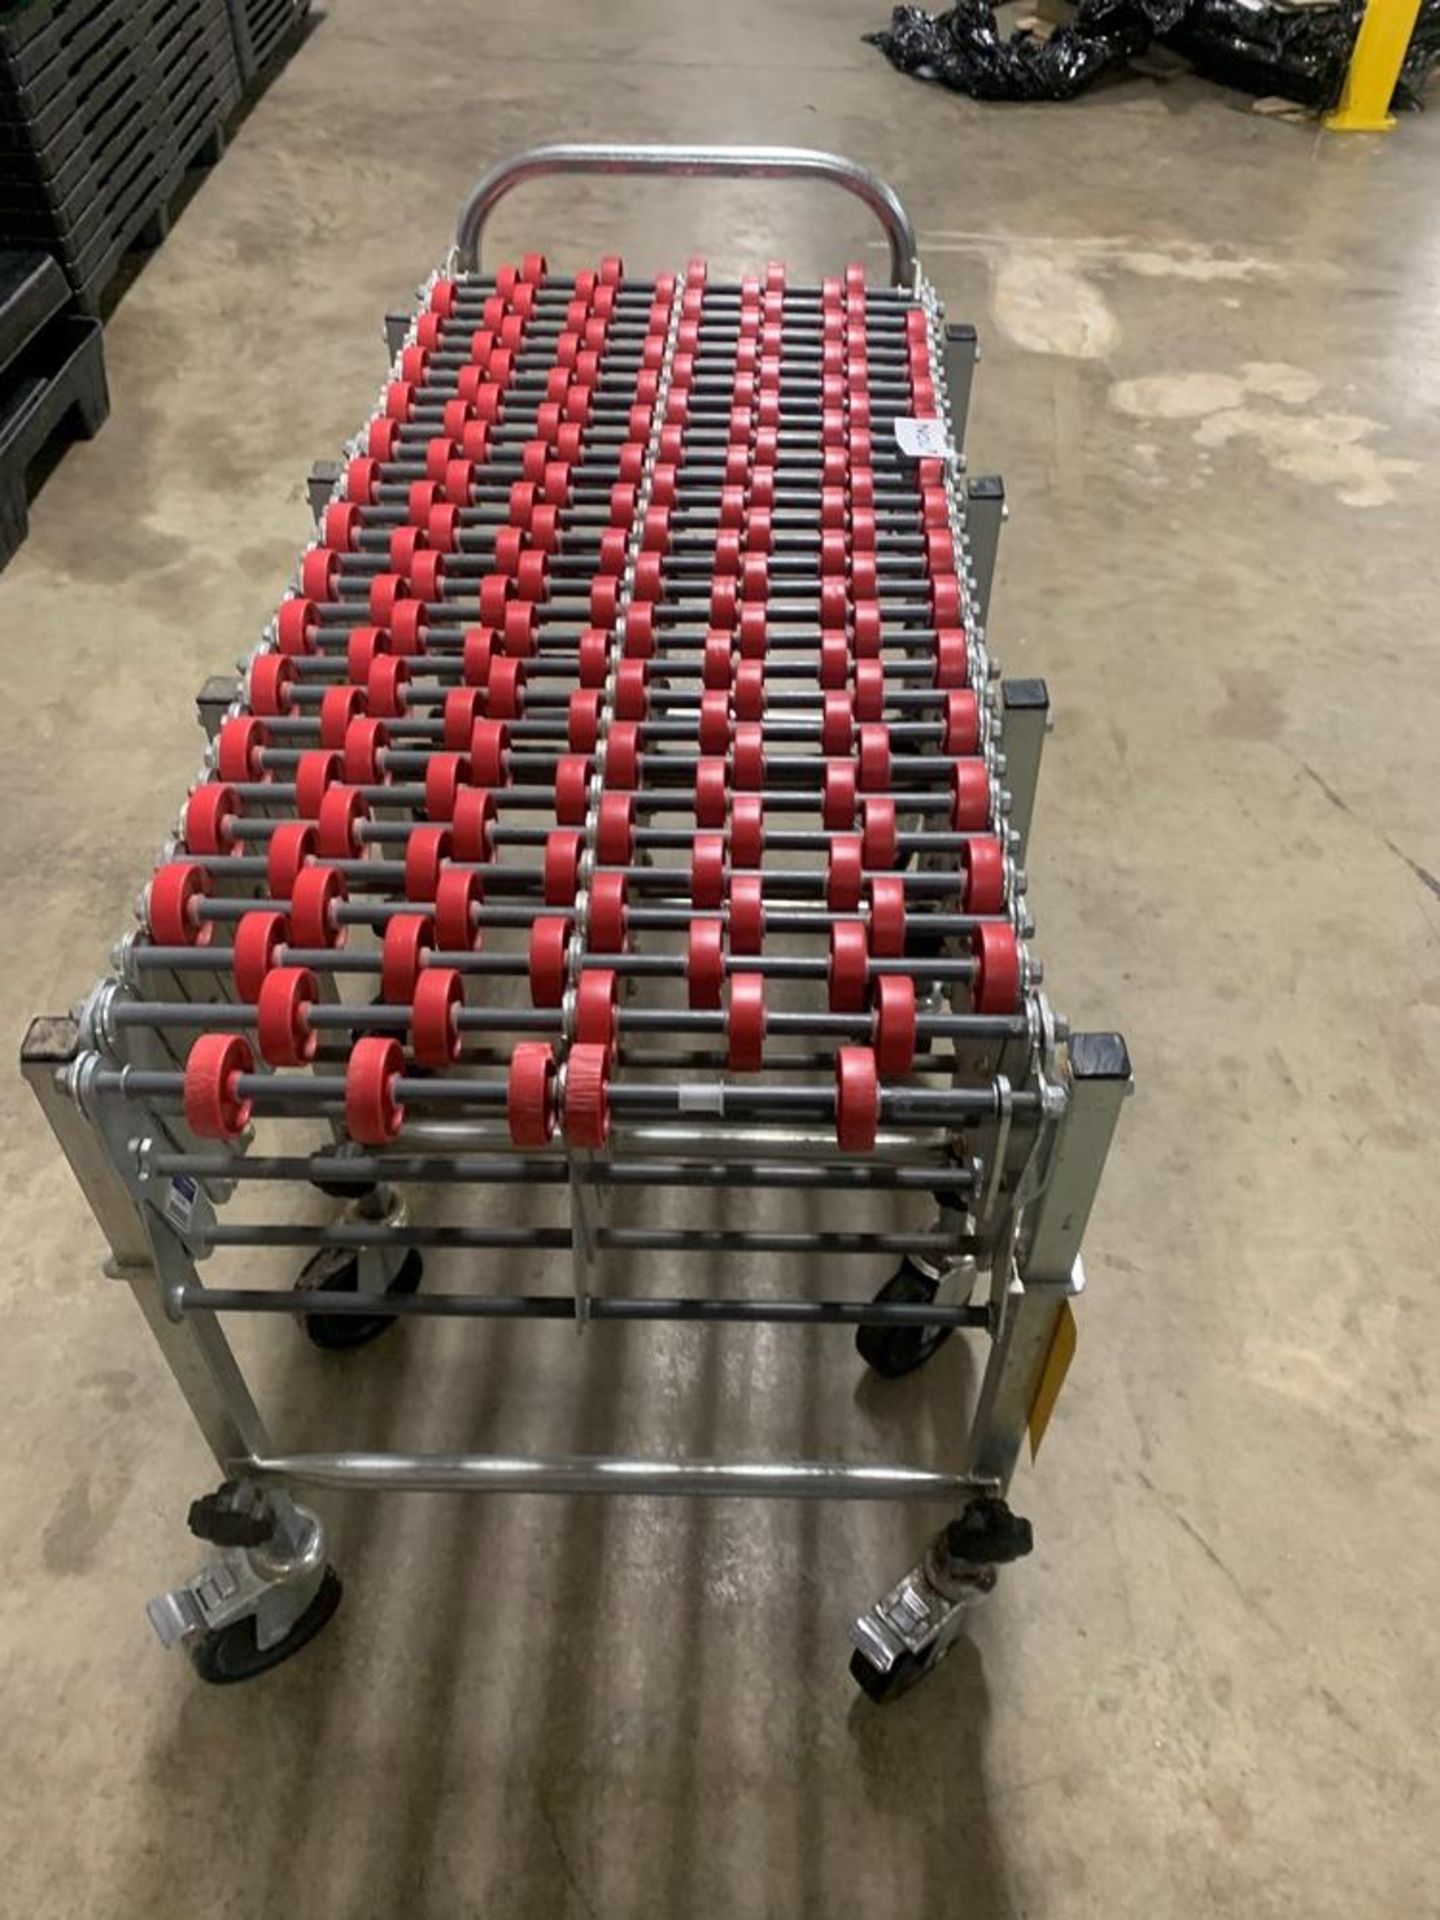 Nestaflex Mdl. 226 Expandable Roller Conveyor (Required Loading Fee: $15.00) NO HAND CARRY (Price Is - Image 2 of 3